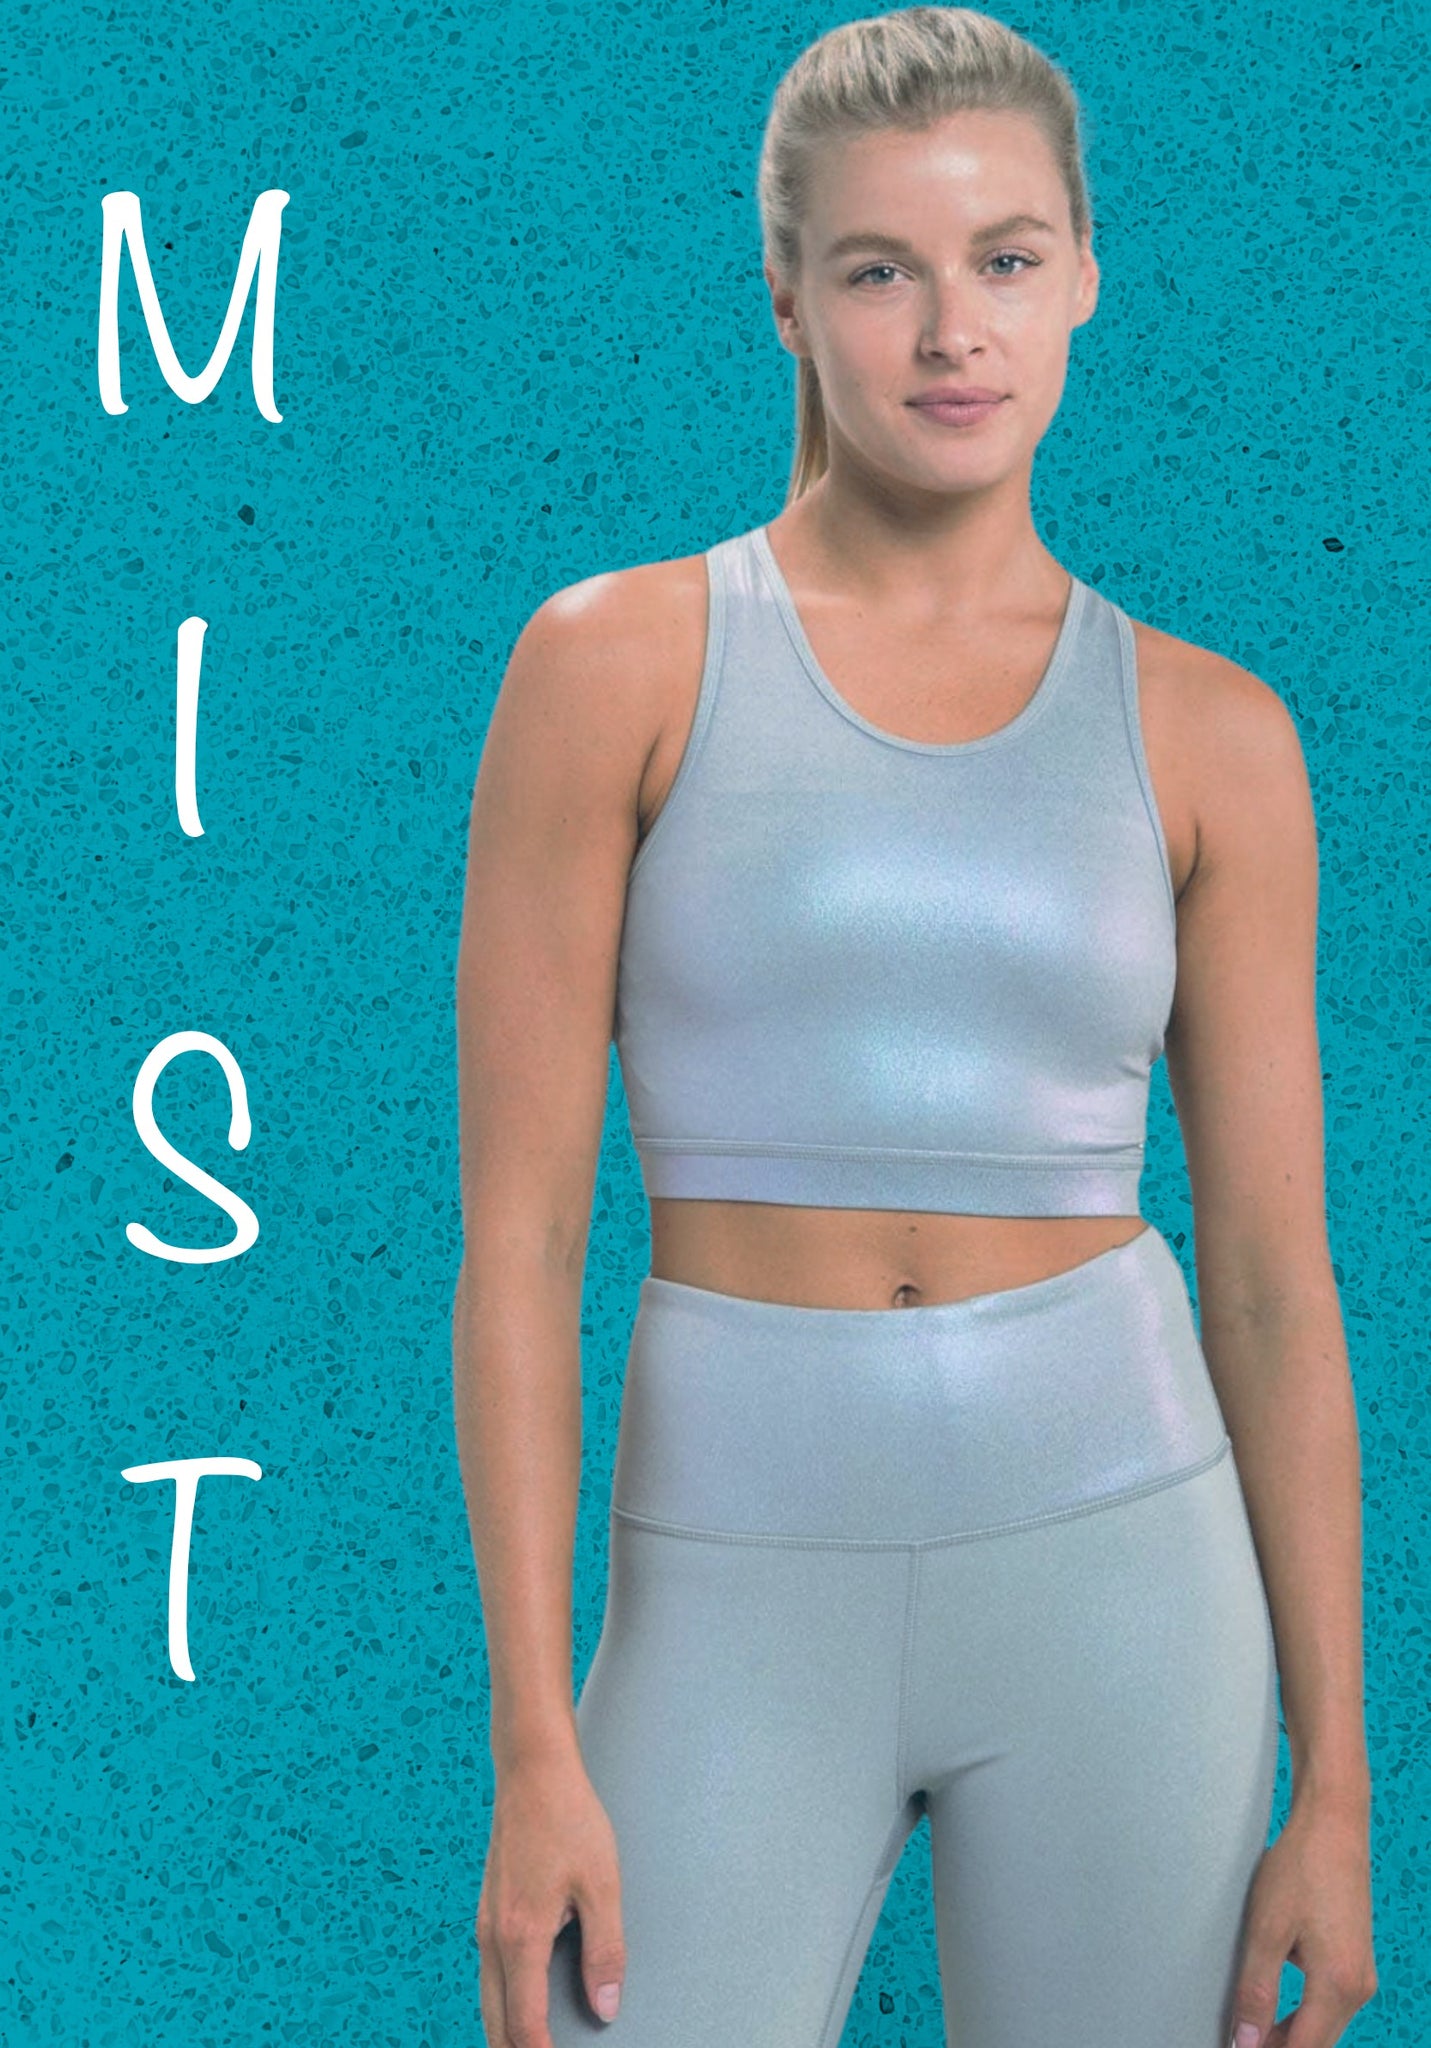 All About That Bass” Pearlescent Holo Foil Razorback Sports Bra